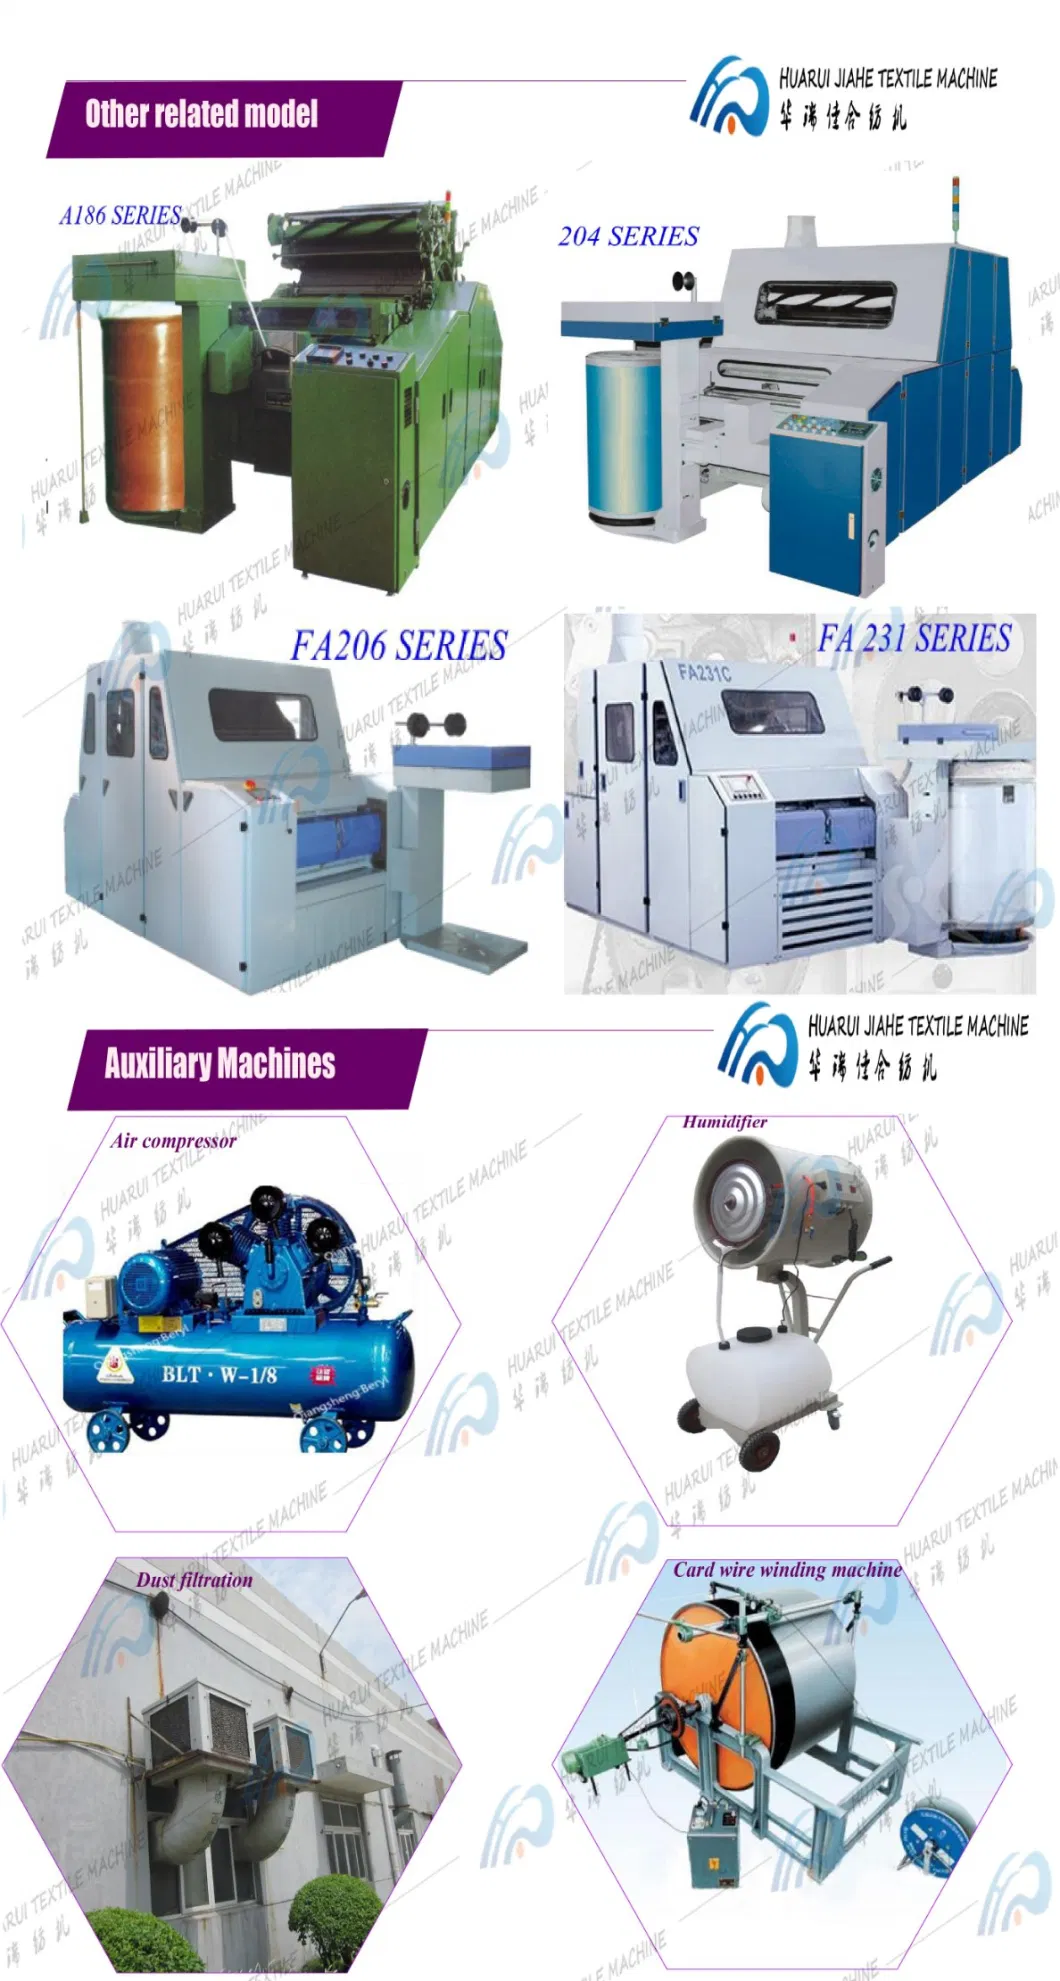 Motorized Tilting Cotton Dyeing Machine with Touch Screen China Wholesale Market Padel Type Fabric Dyeing Machine with Long Service Life